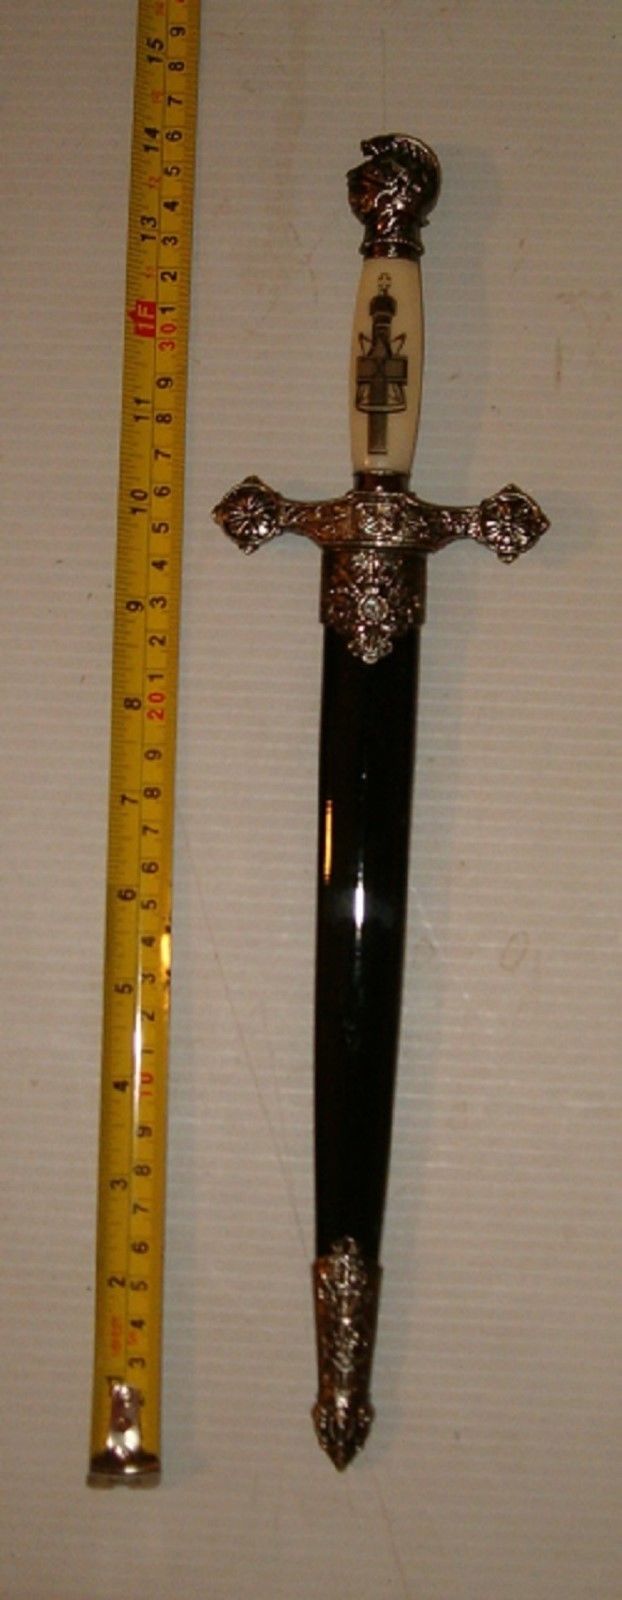 VERY DETAILED  MEDIEVAL KNIGHTS DAGGER KNIFE WITH SHEATH ,  FREE SHIPPING !!!